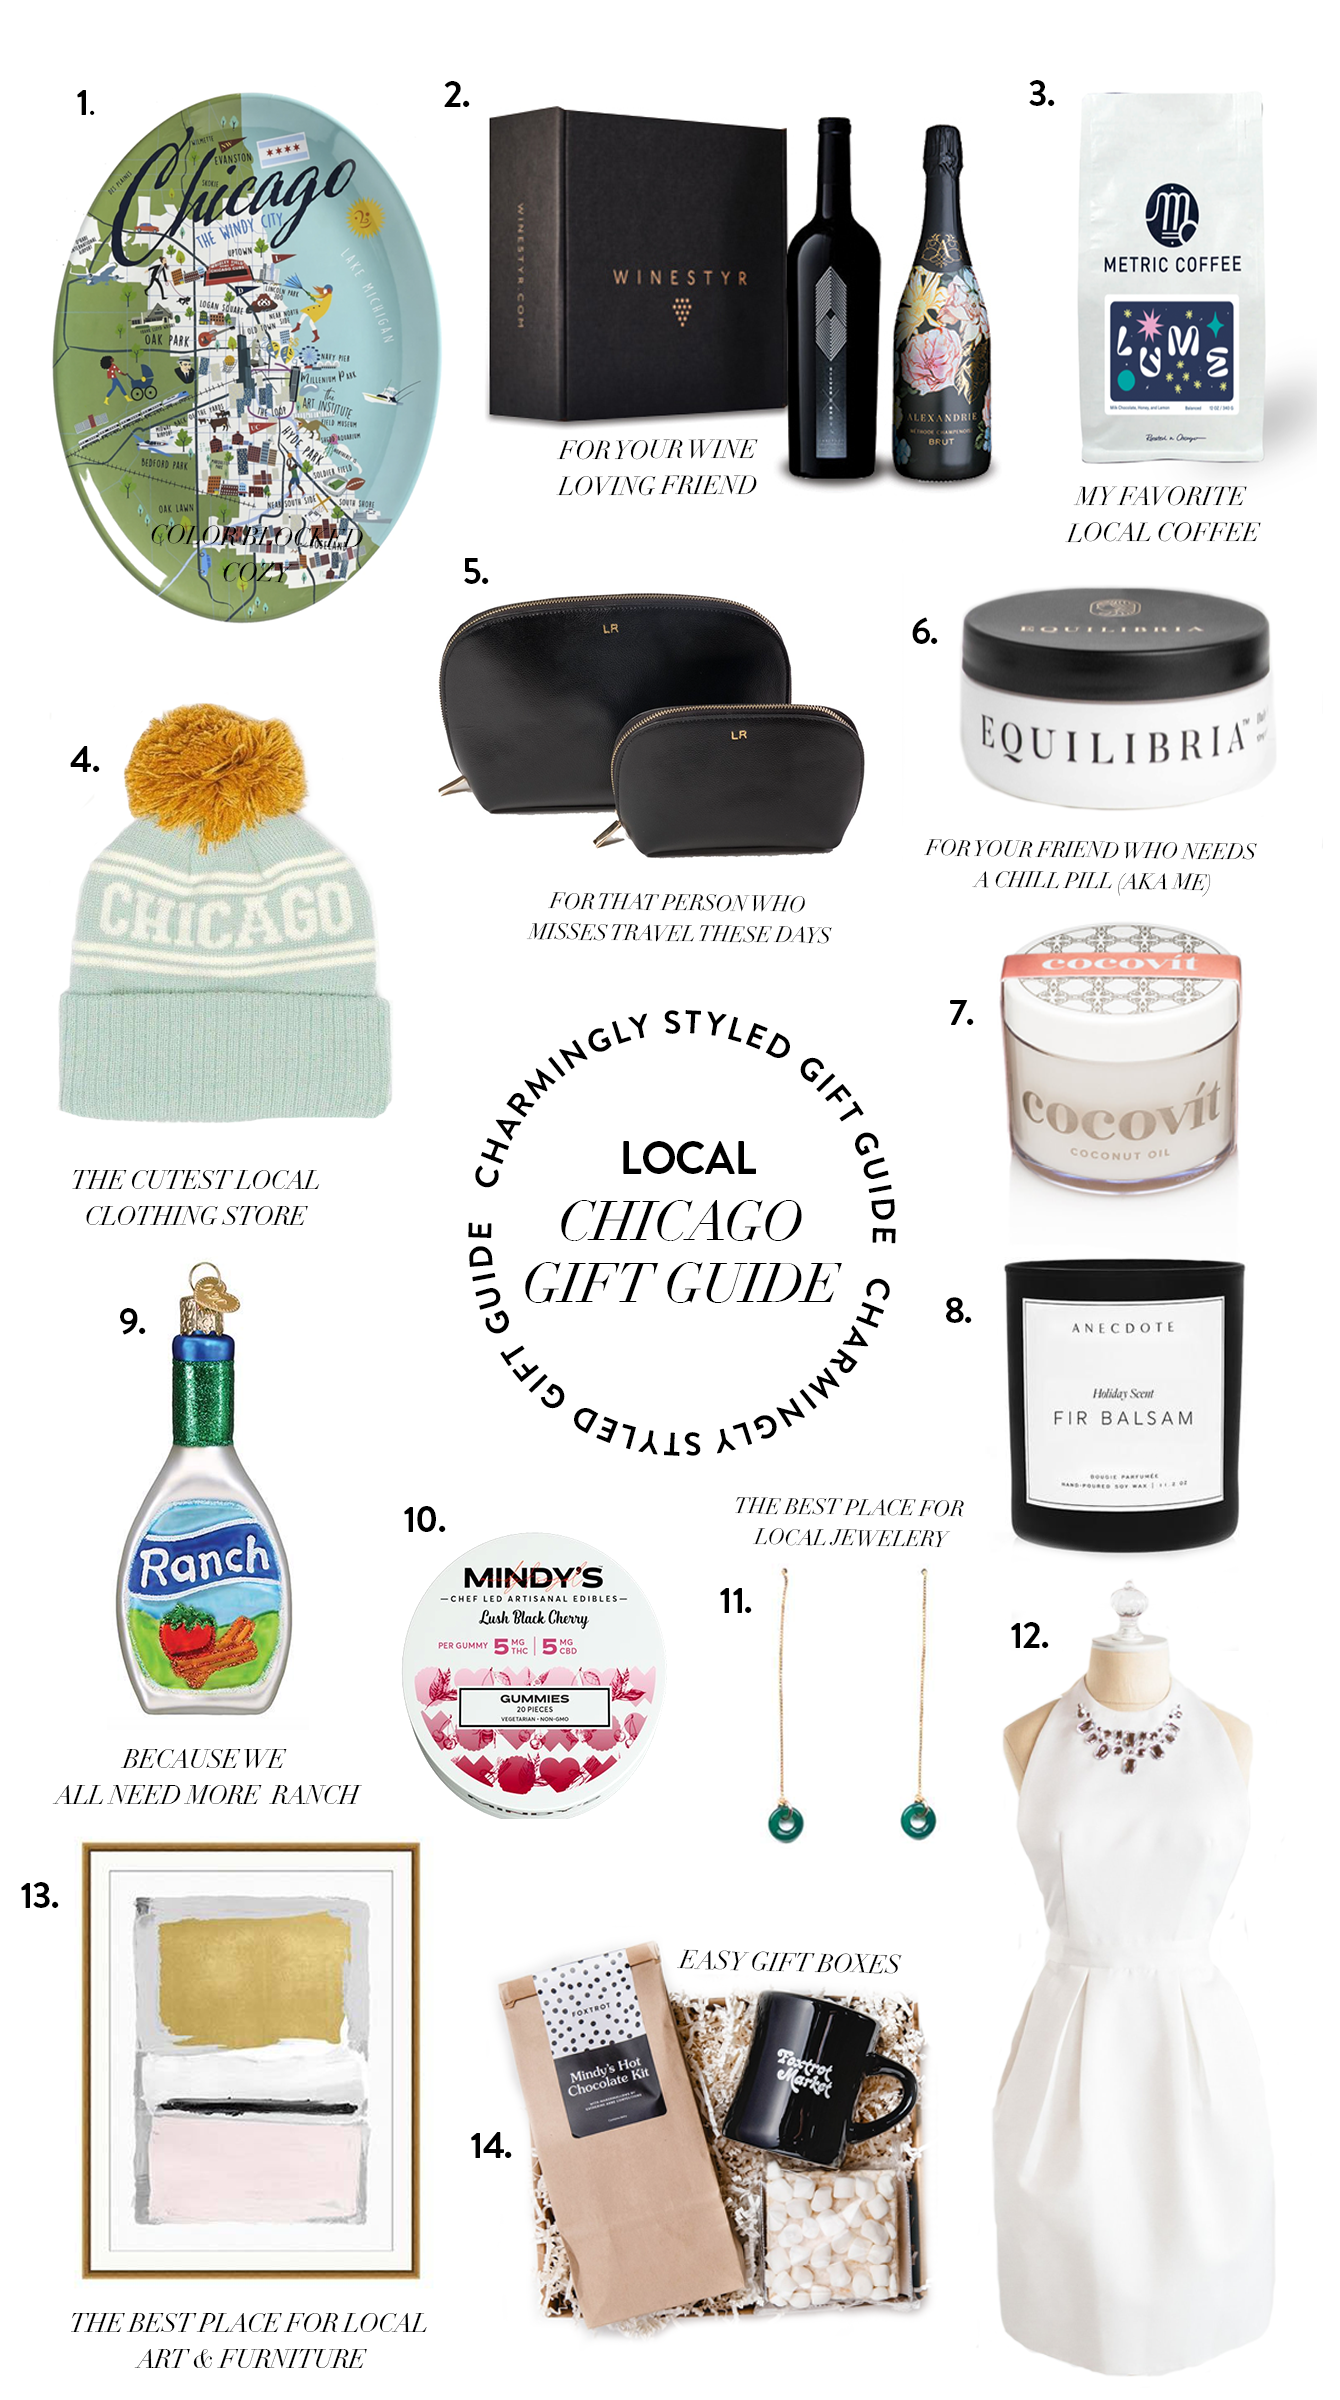 5 local gift ideas for loved ones holiday season